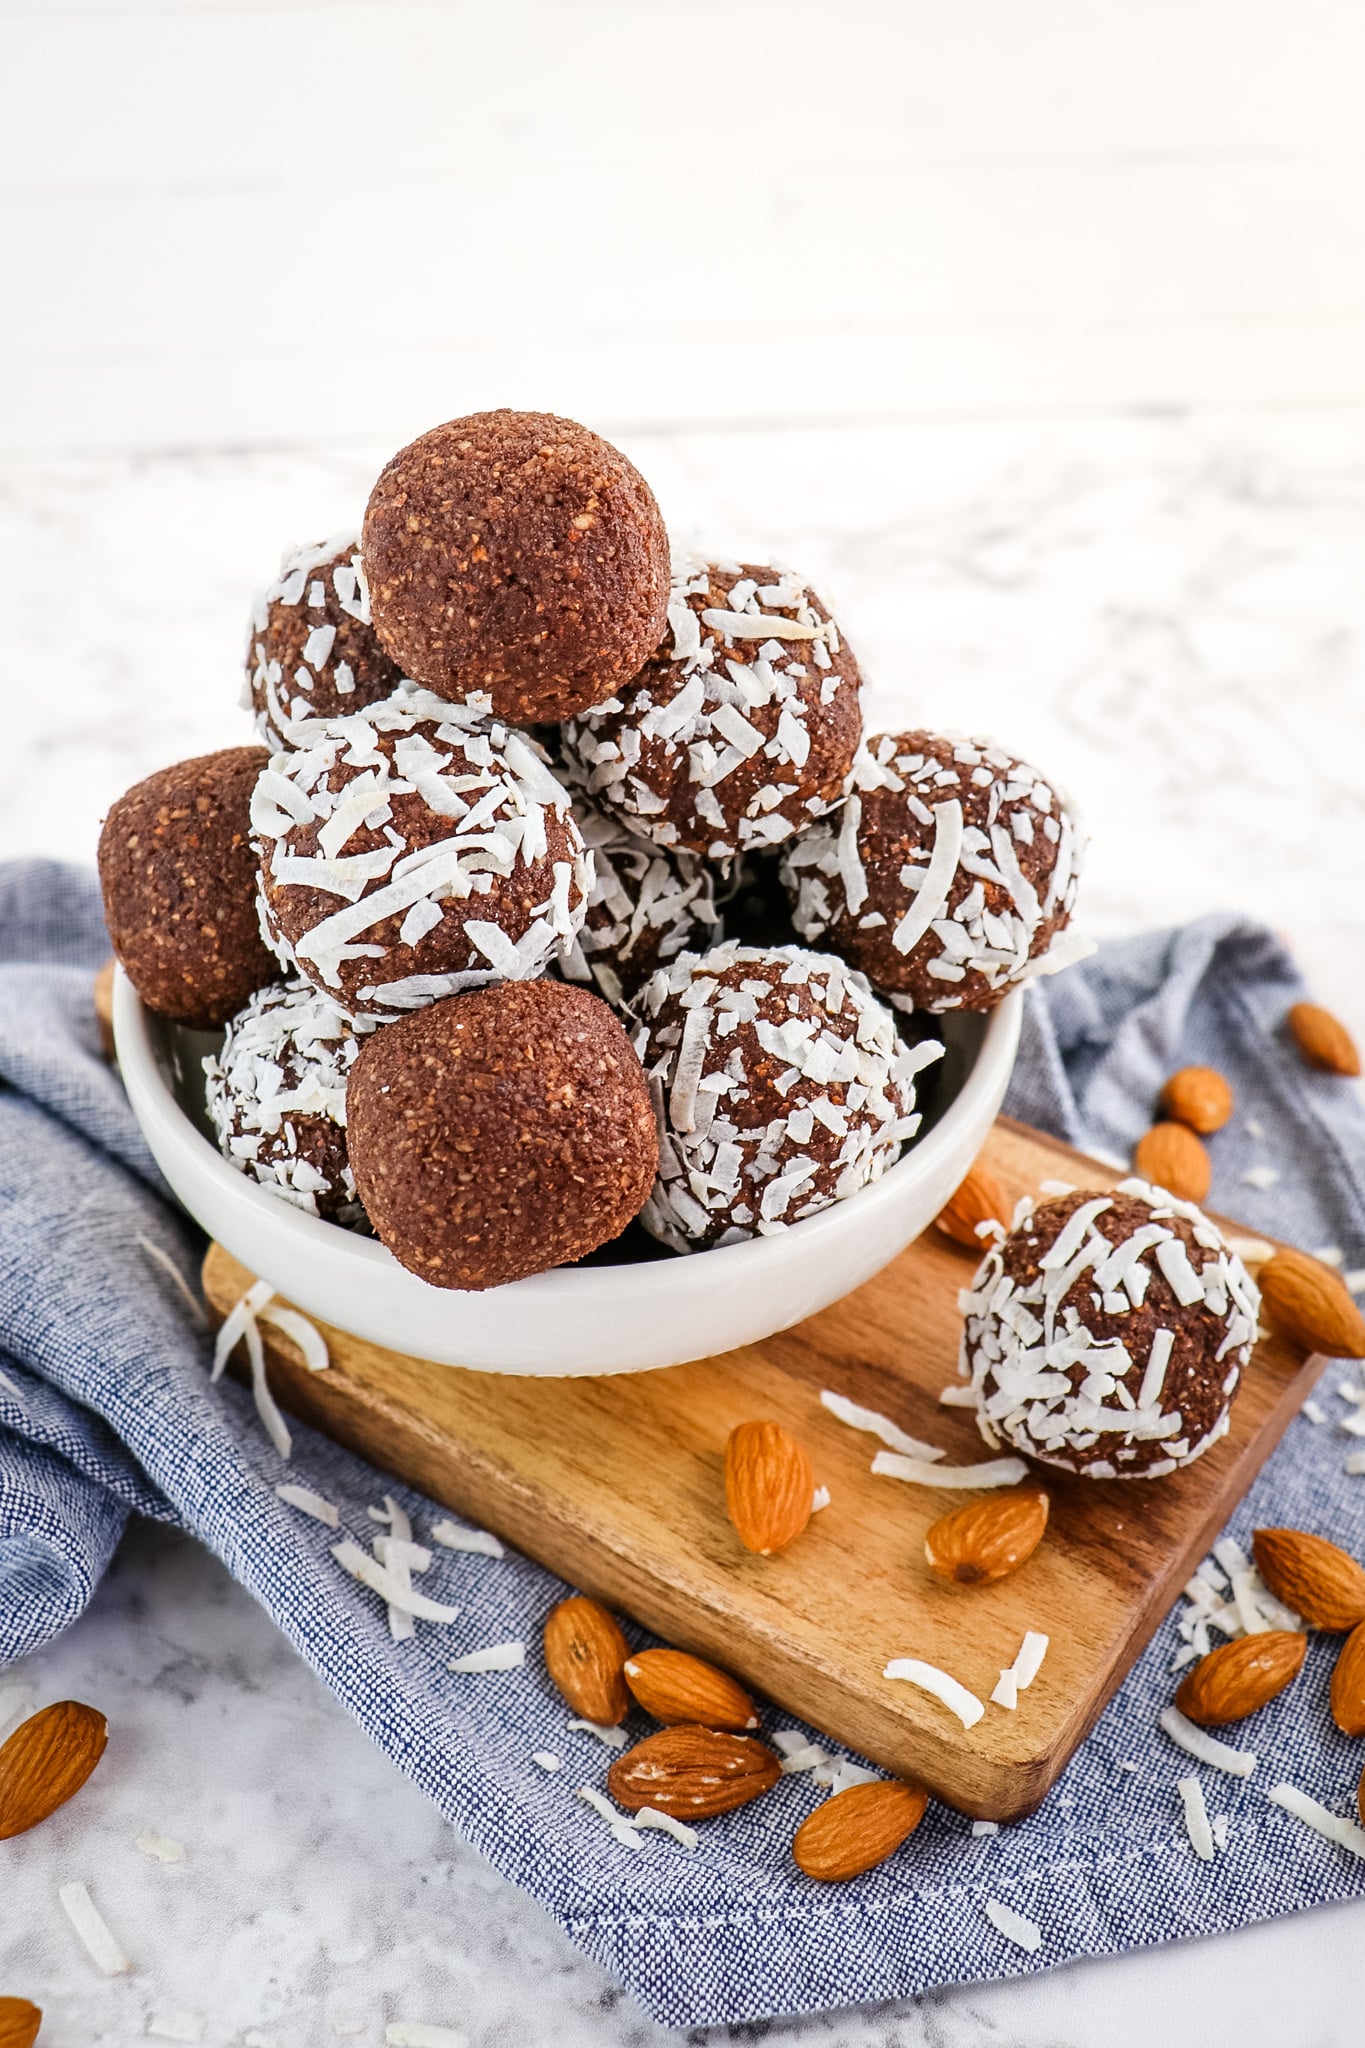 Chocolate coconut date balls in bowl garnished with almonds and coconut.